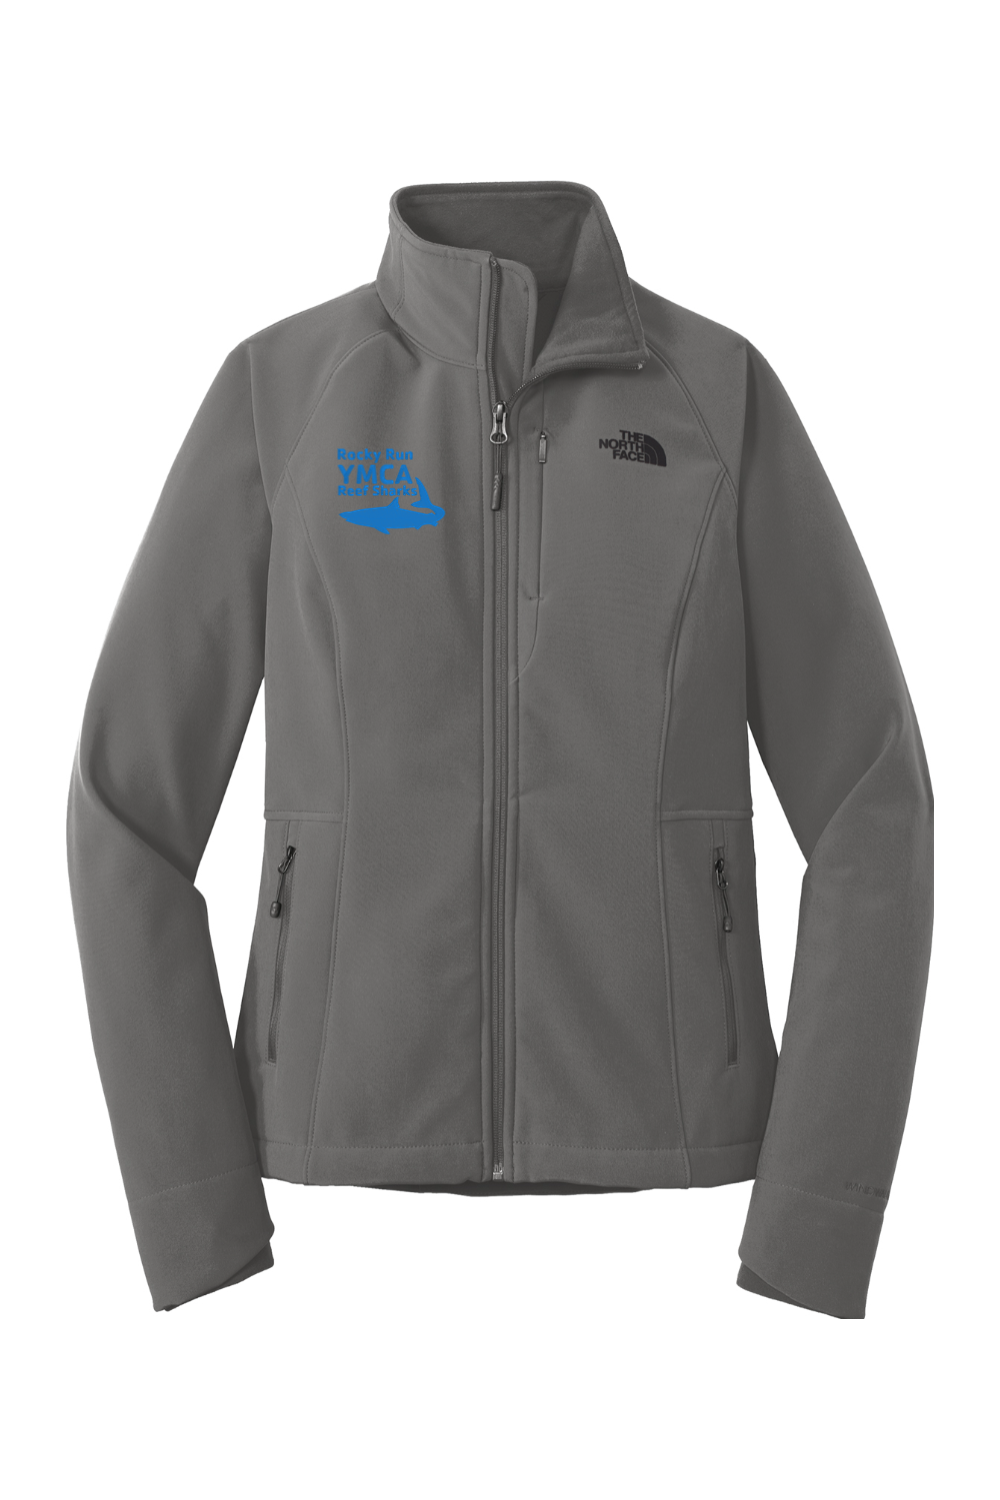 ROCKY RUN The North Face Ladies Apex Barrier Soft Shell Jacket